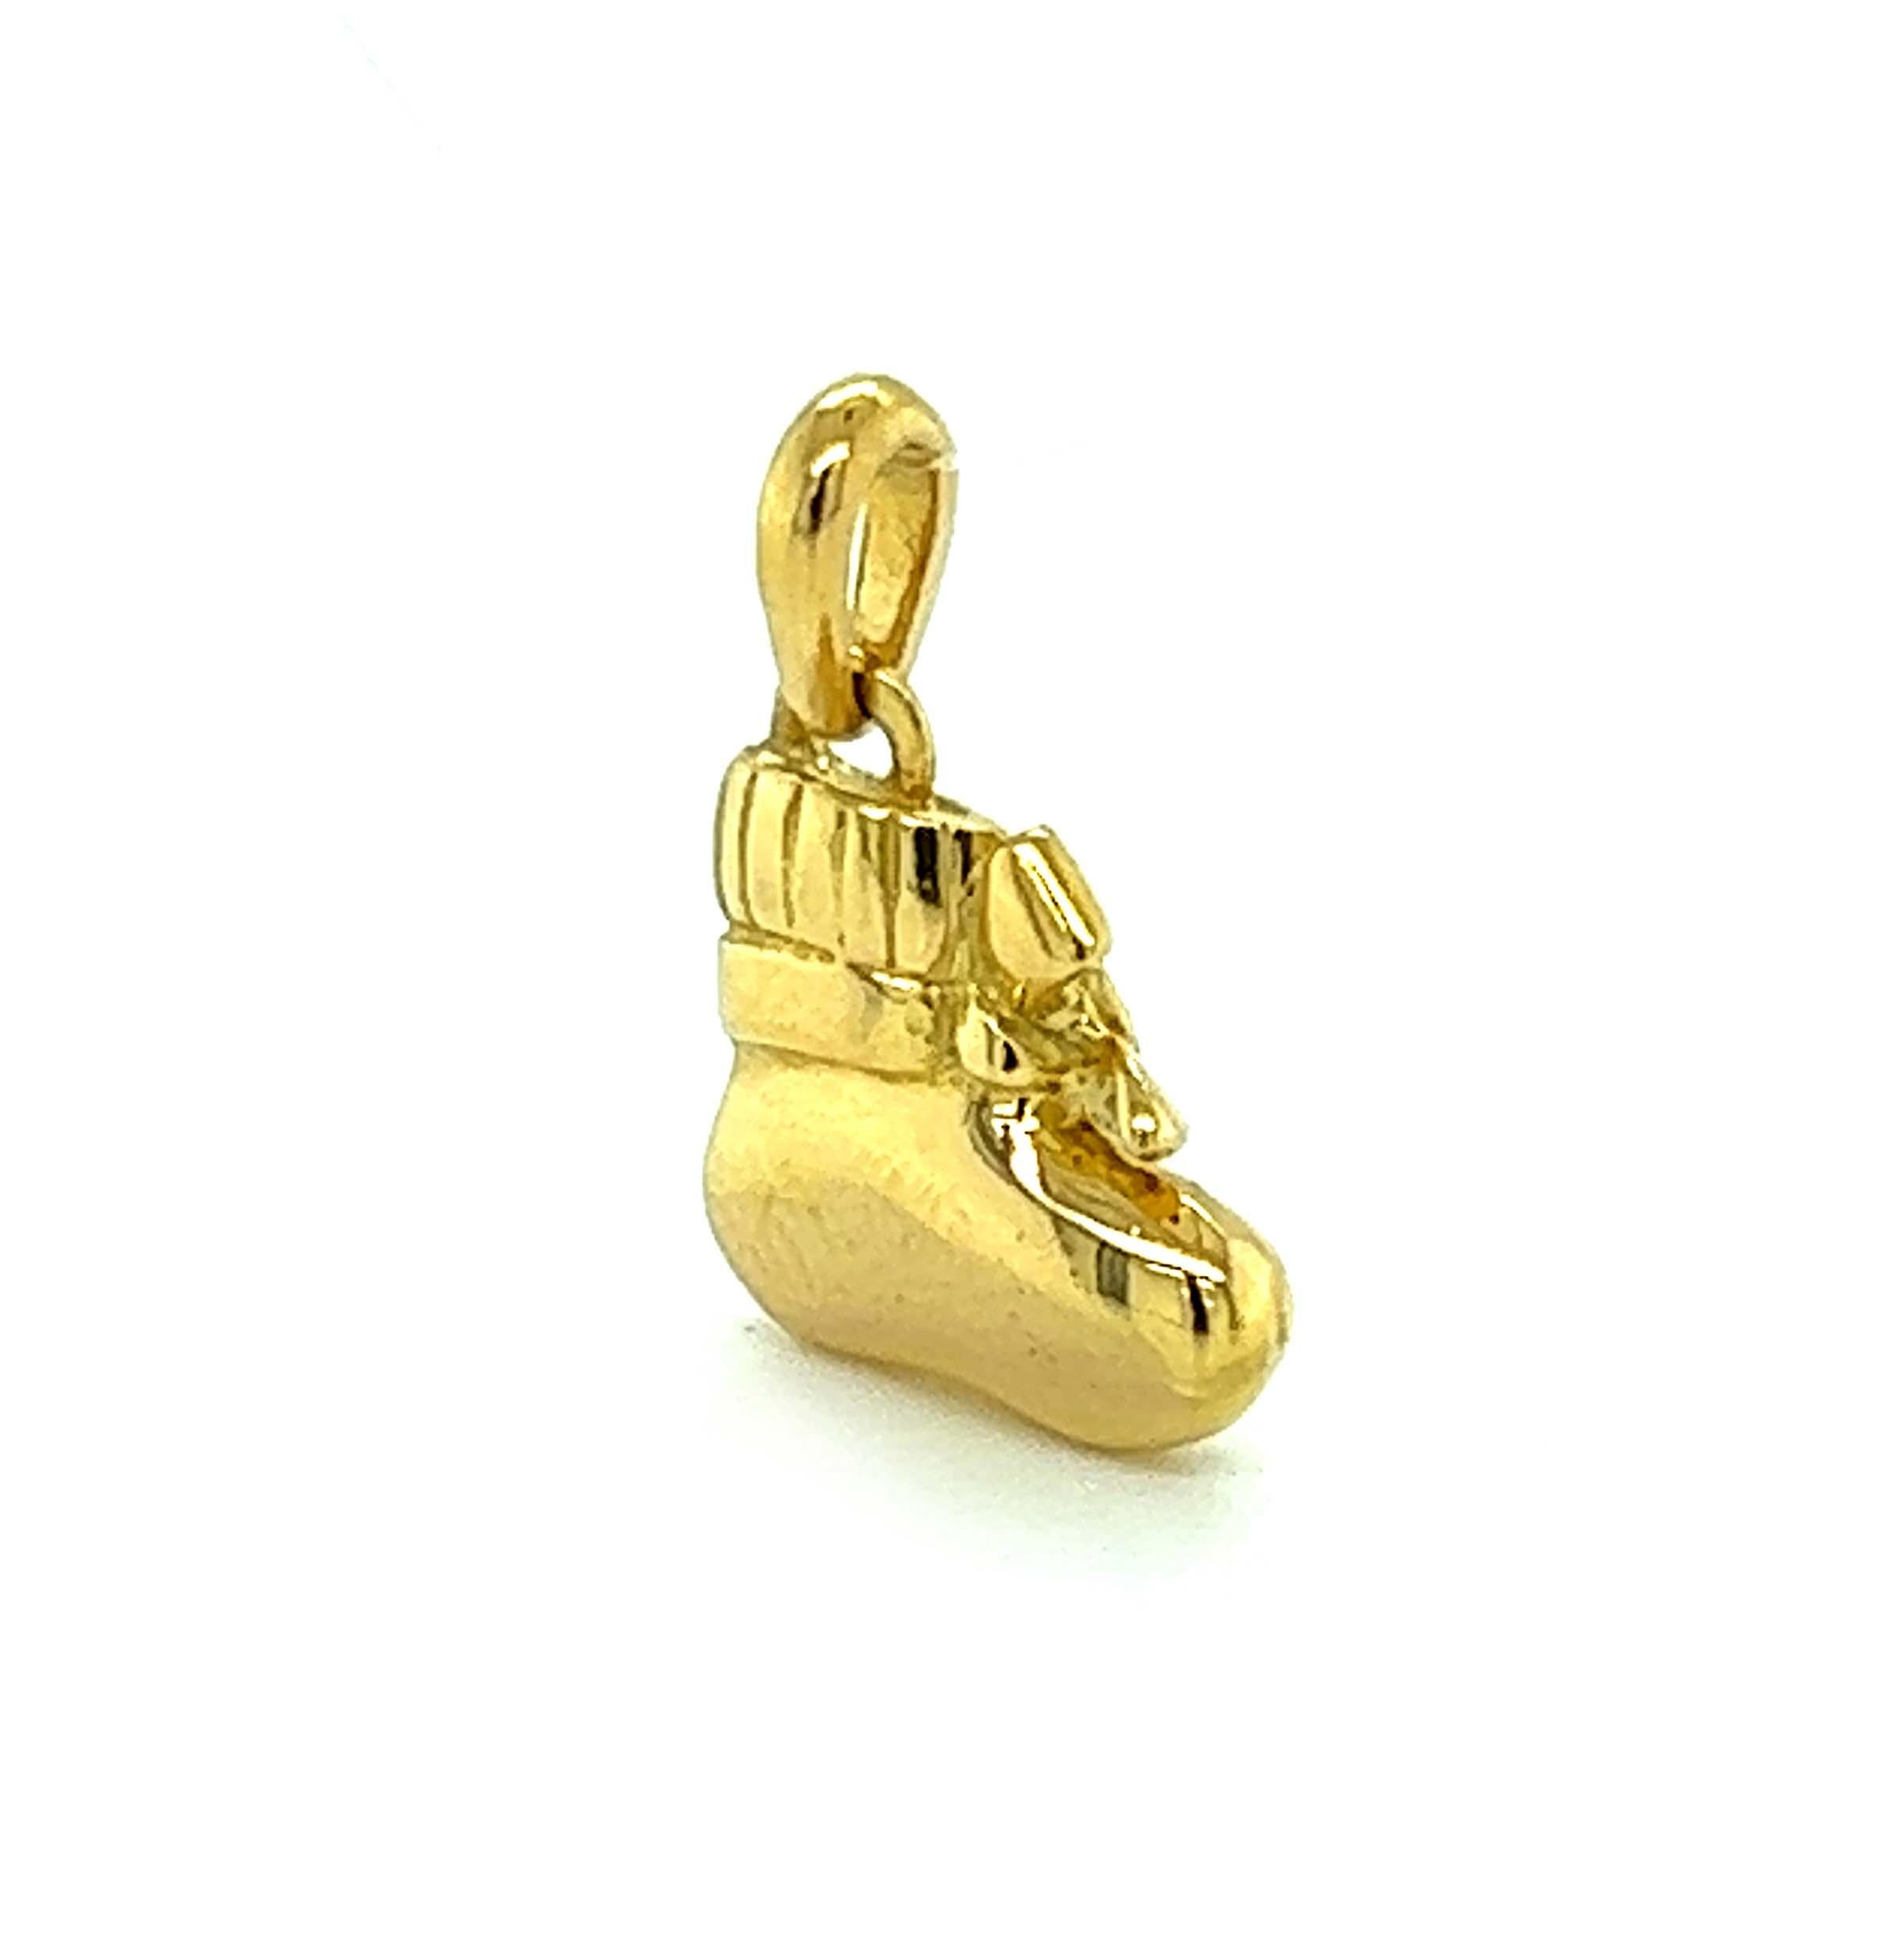 This adorable authentic charm or pendant is by Van Cleef & Arpels, it is crafted from 18k yellow gold with a polished finish featuring a baby girl booty with a ribbon bow tie accented with a small round cut sapphire gemstone. The charm comes with an